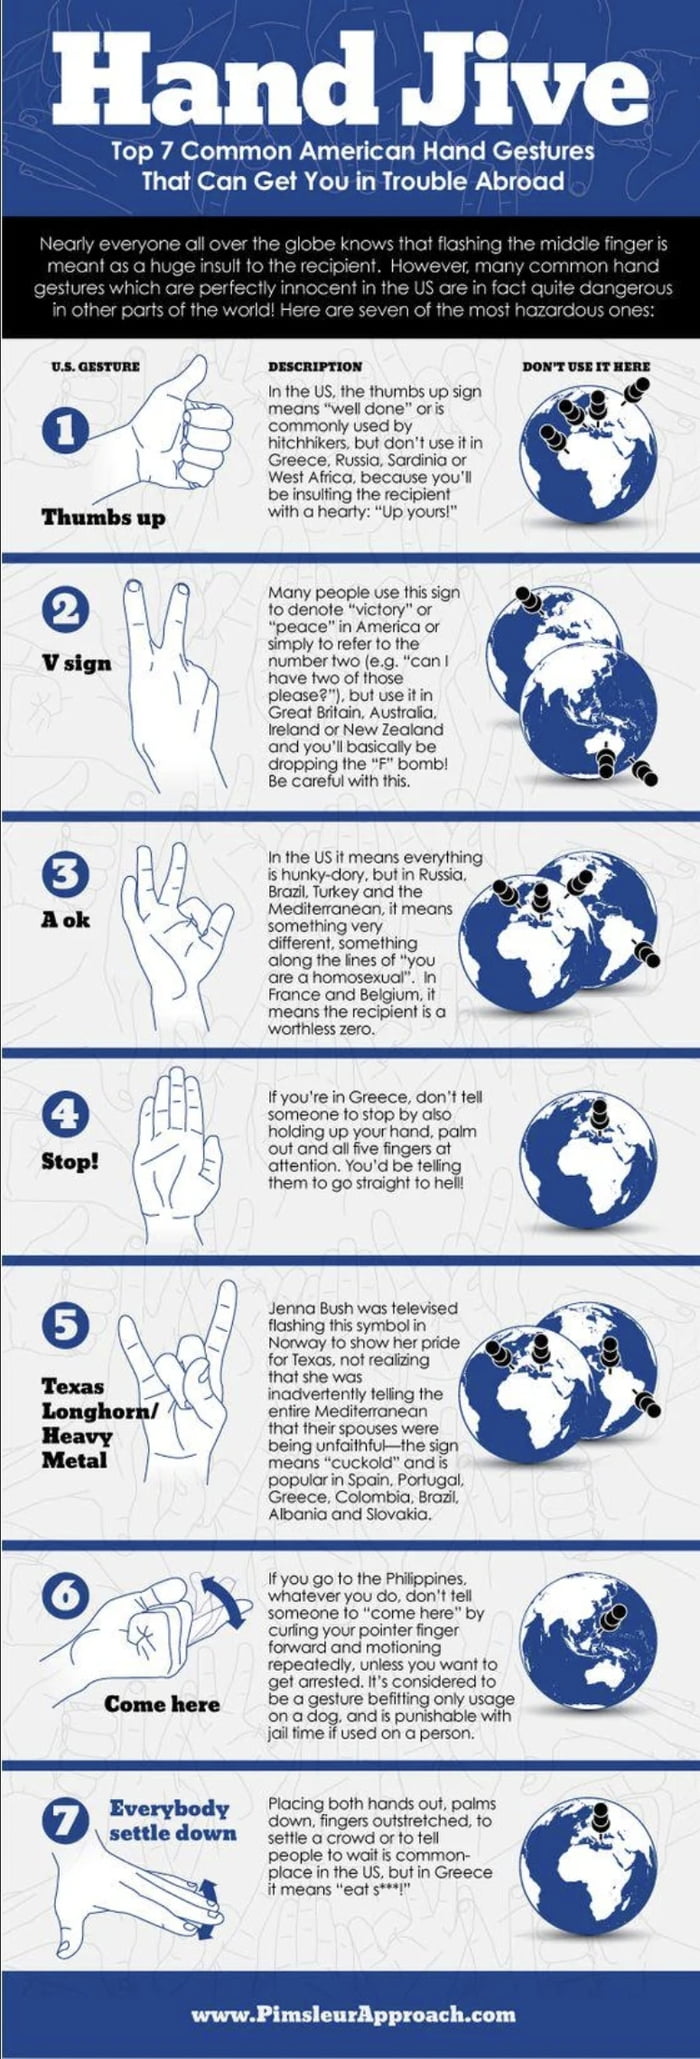 Hand jive (signs) different meaning in countries